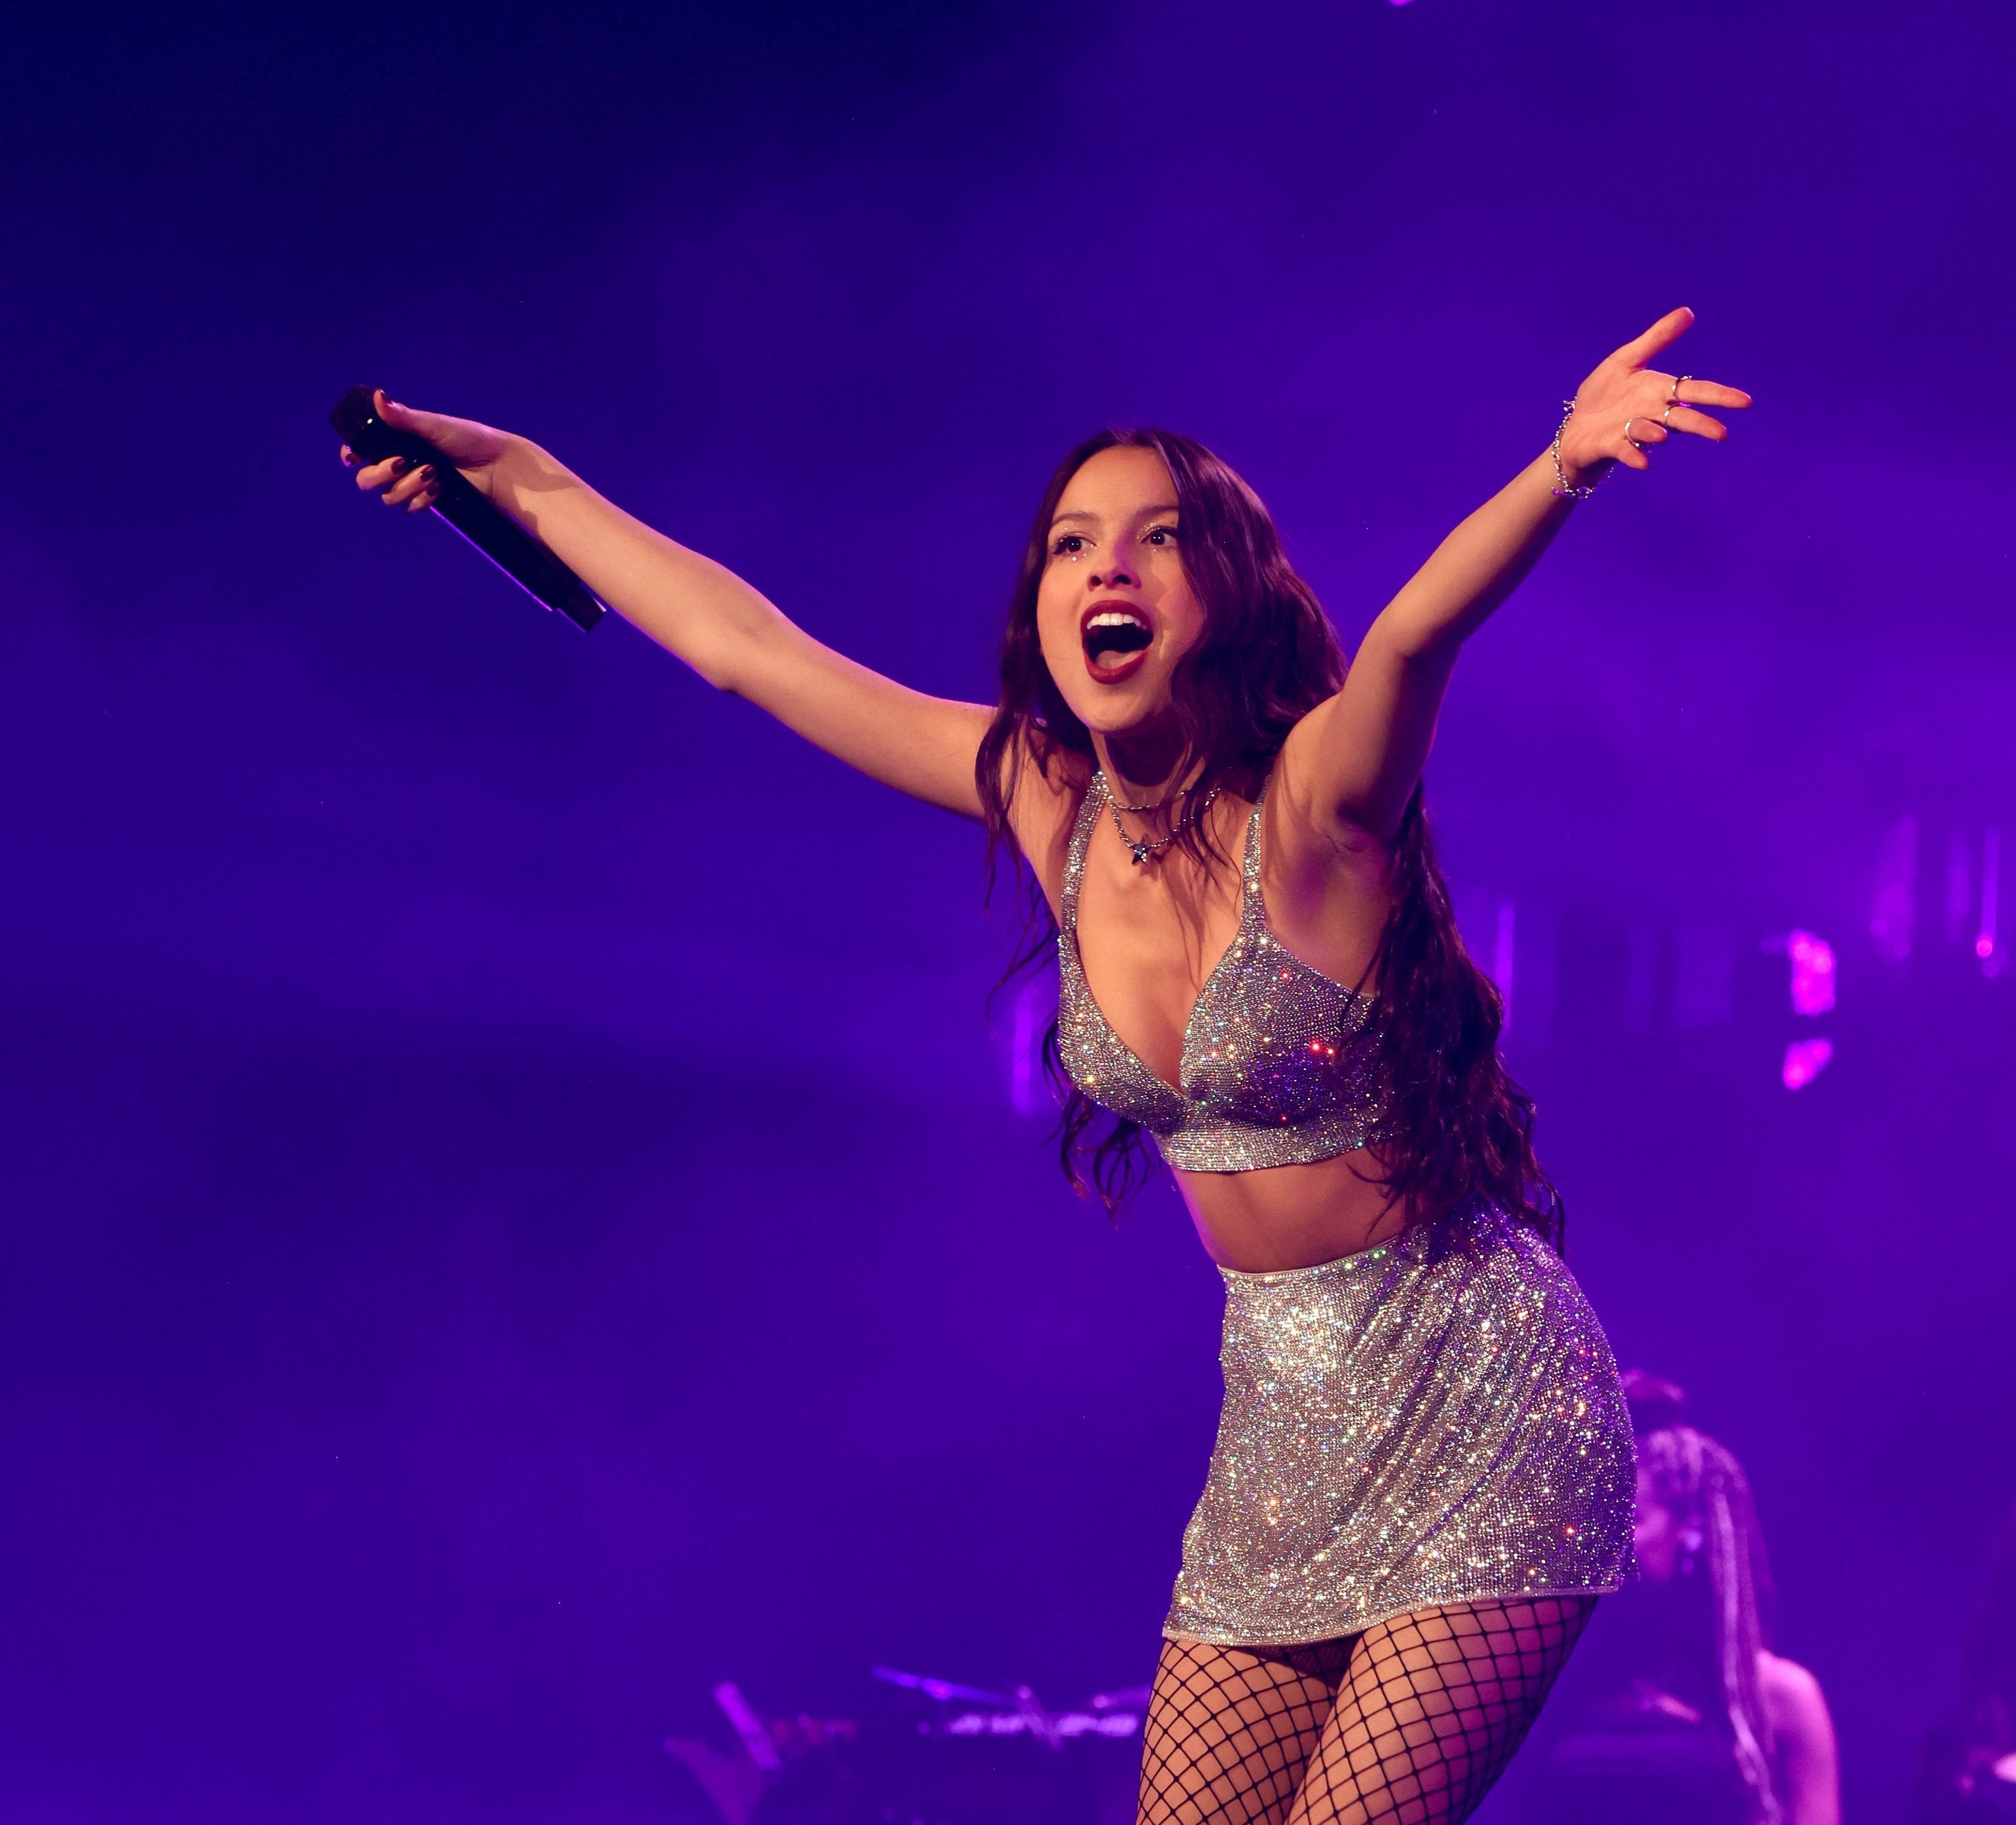 Olivia Rodrigo on stage in sparkly top and skirt, performing with her arms outstretched